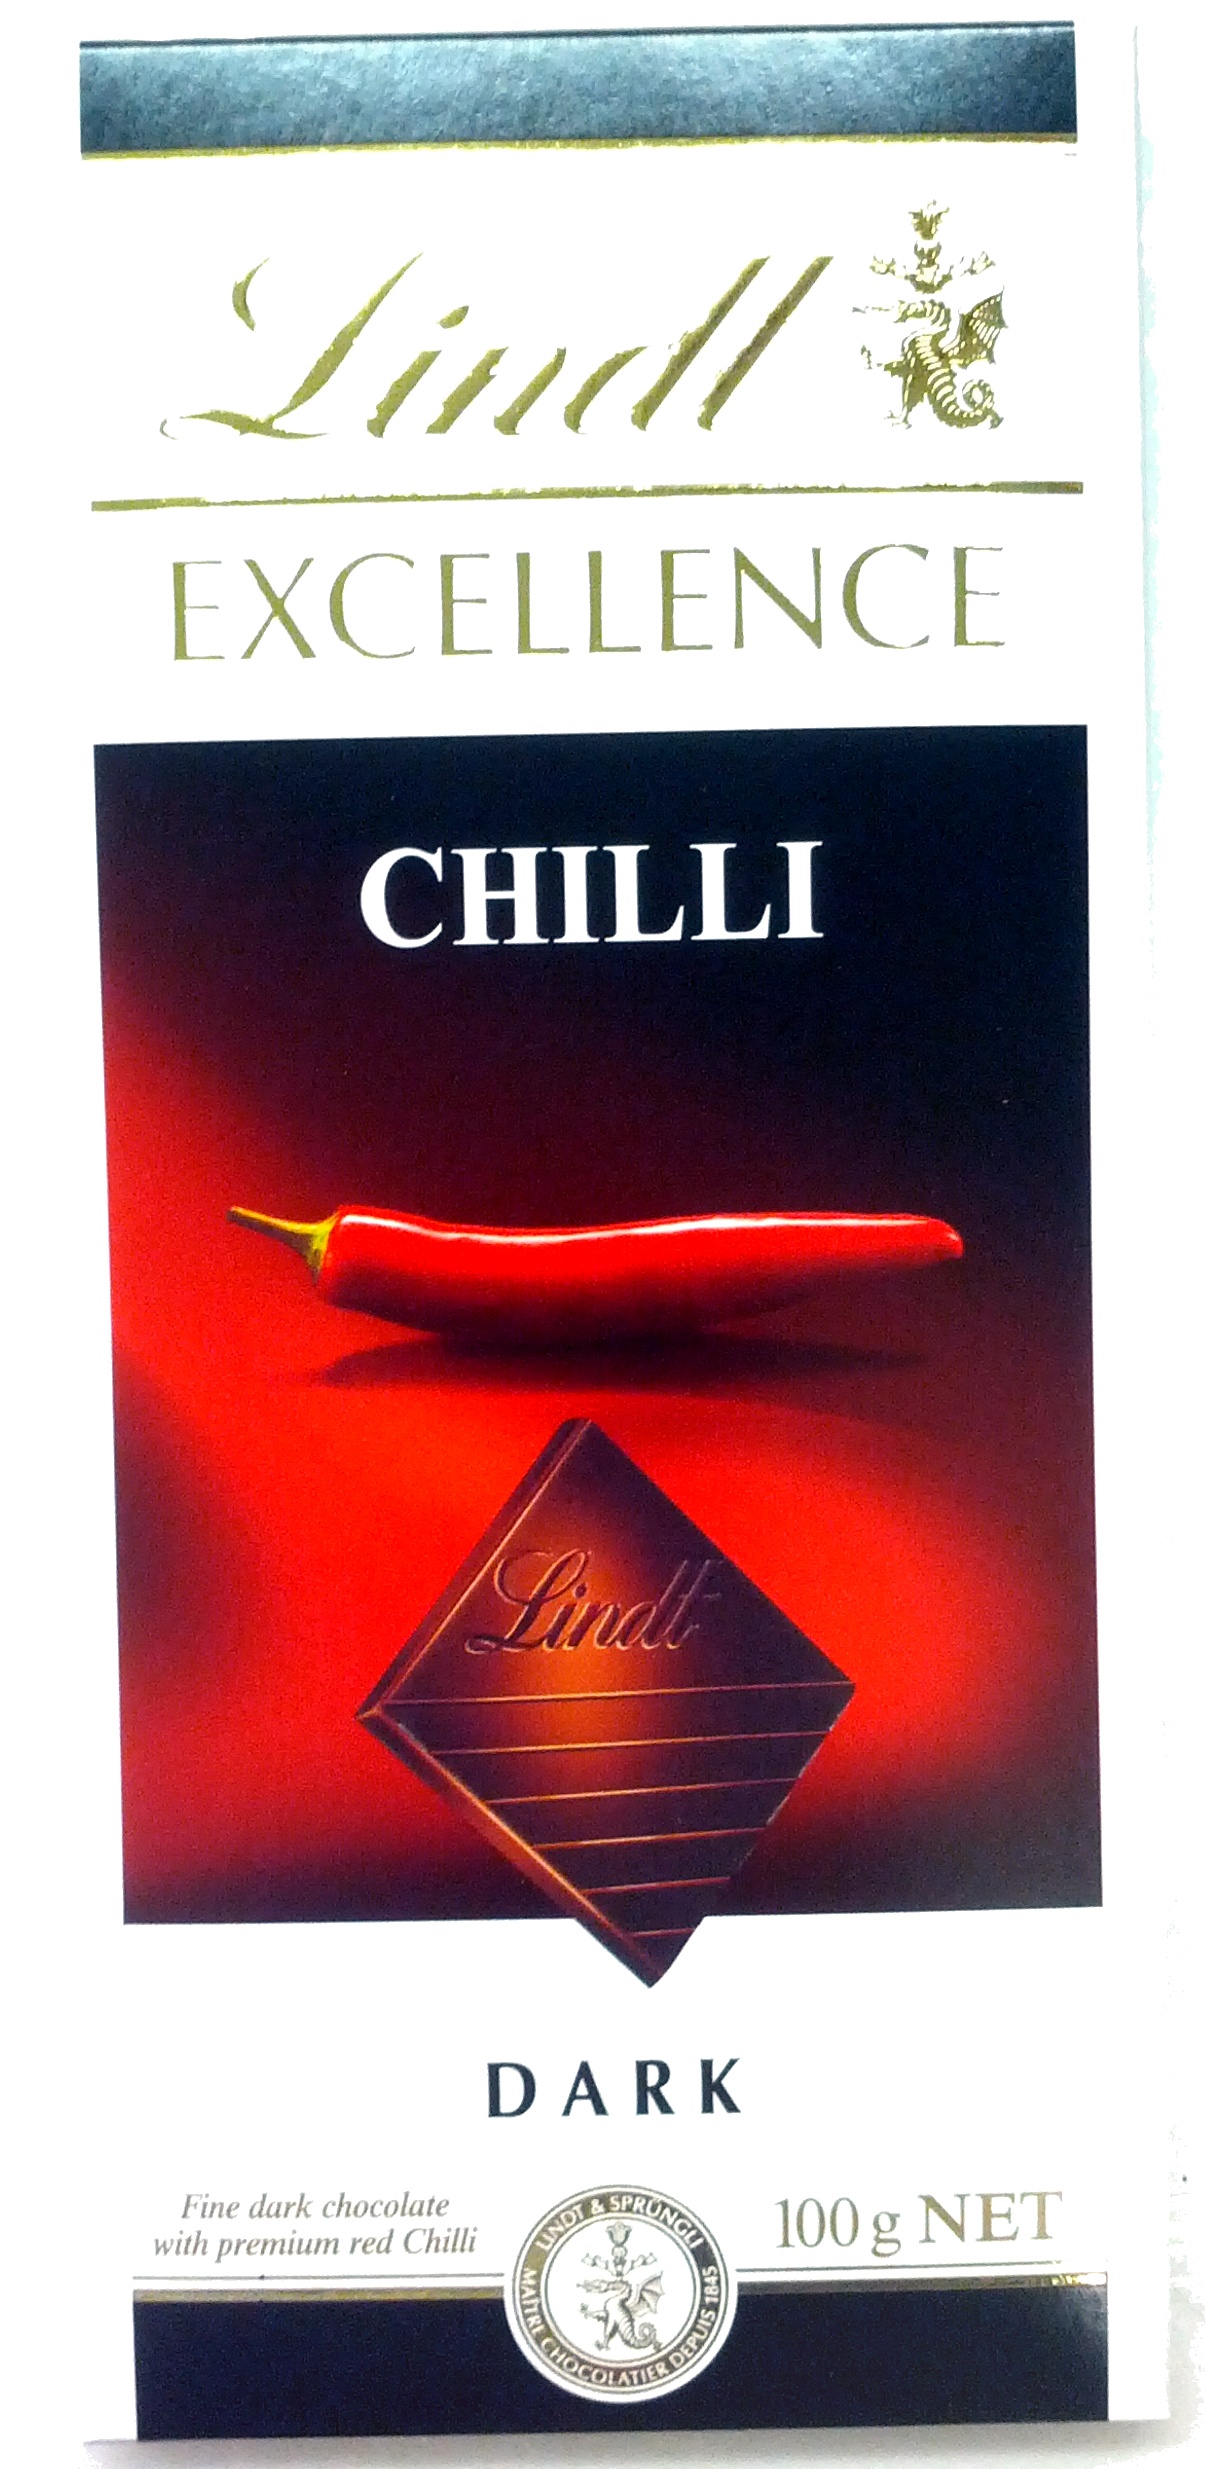 Excellence Dark Chilli - Product - en